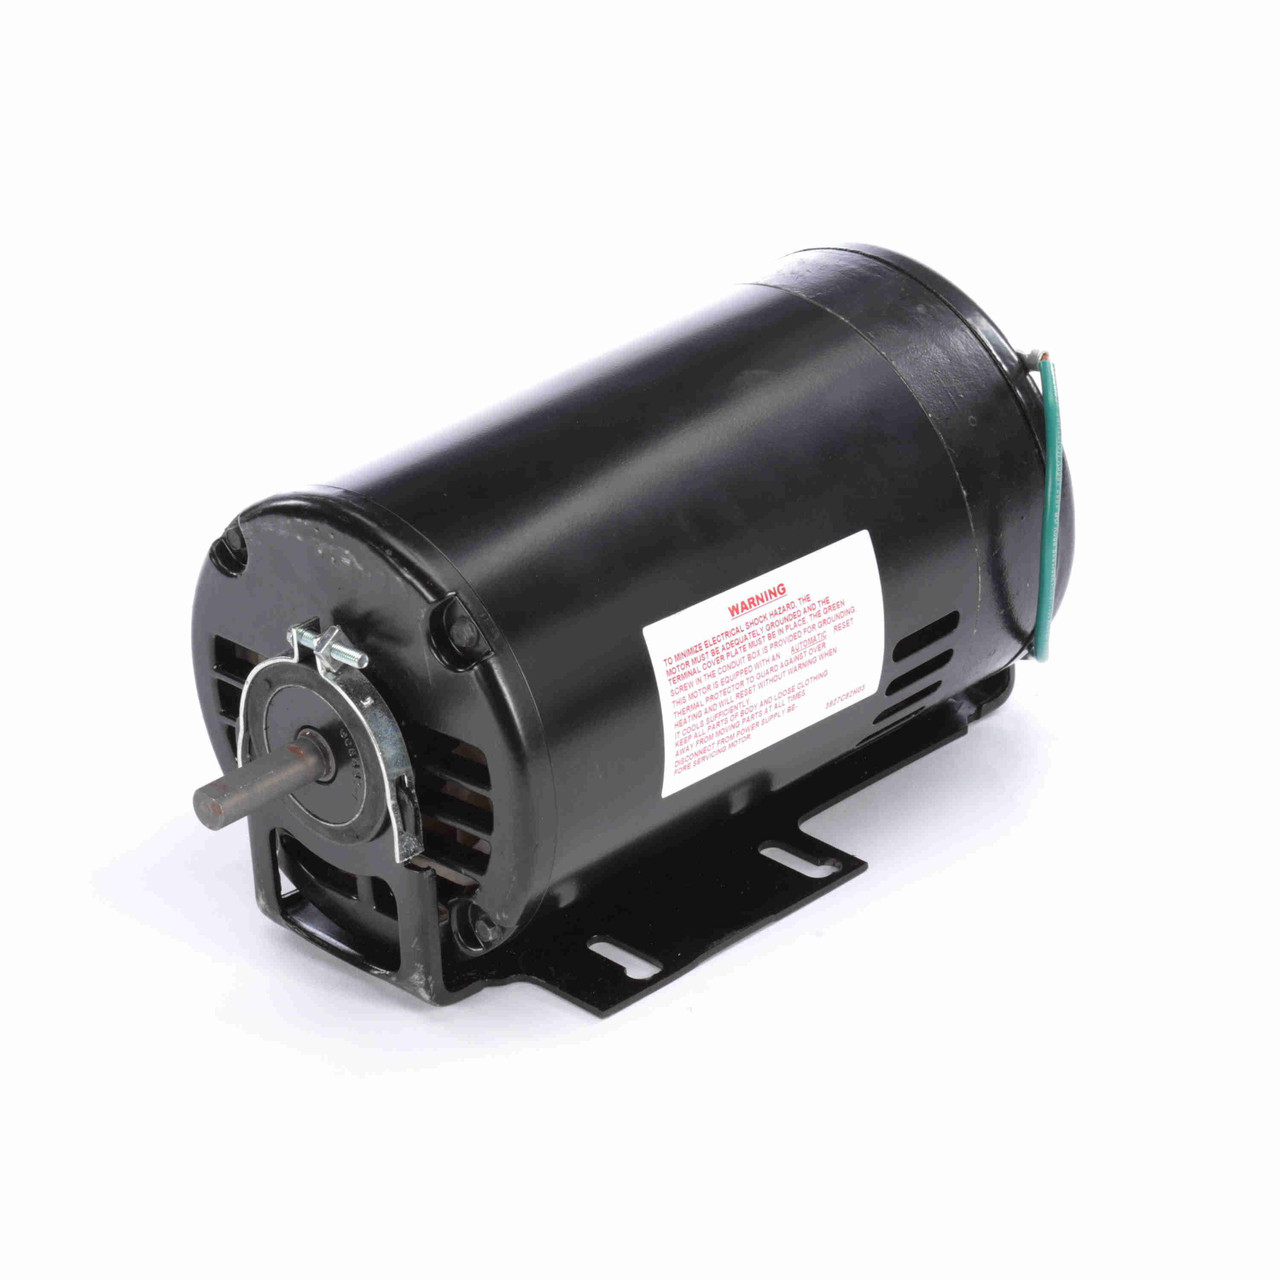 BF1102 Century Fan and Blower Motor 1 HP 3600 RPM 48 Frame